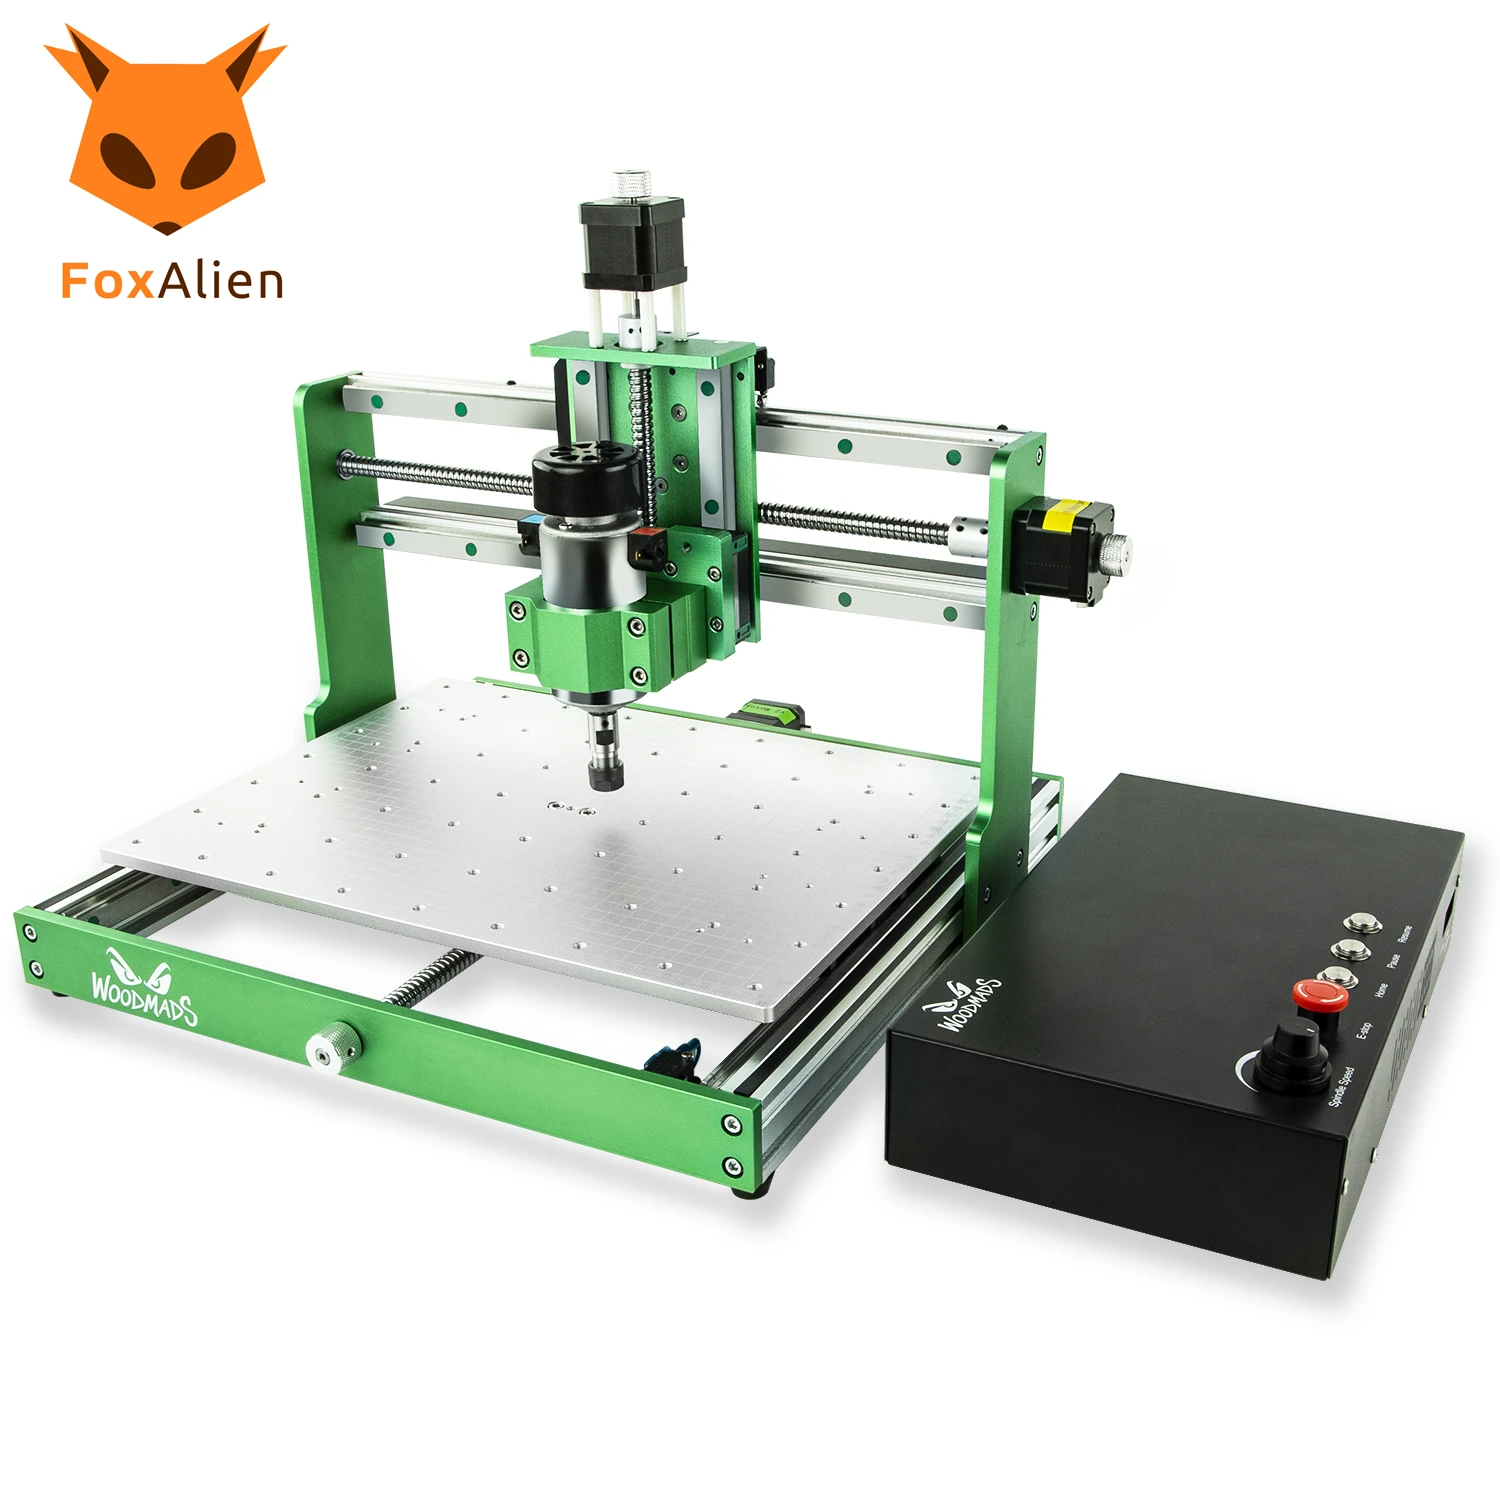 FoxAlien WoodMads All Metal CNC Router Machine, 3 Axis Desktop Linear Rail Ball Screw Aluminum Milling Machine with 300W Spindle